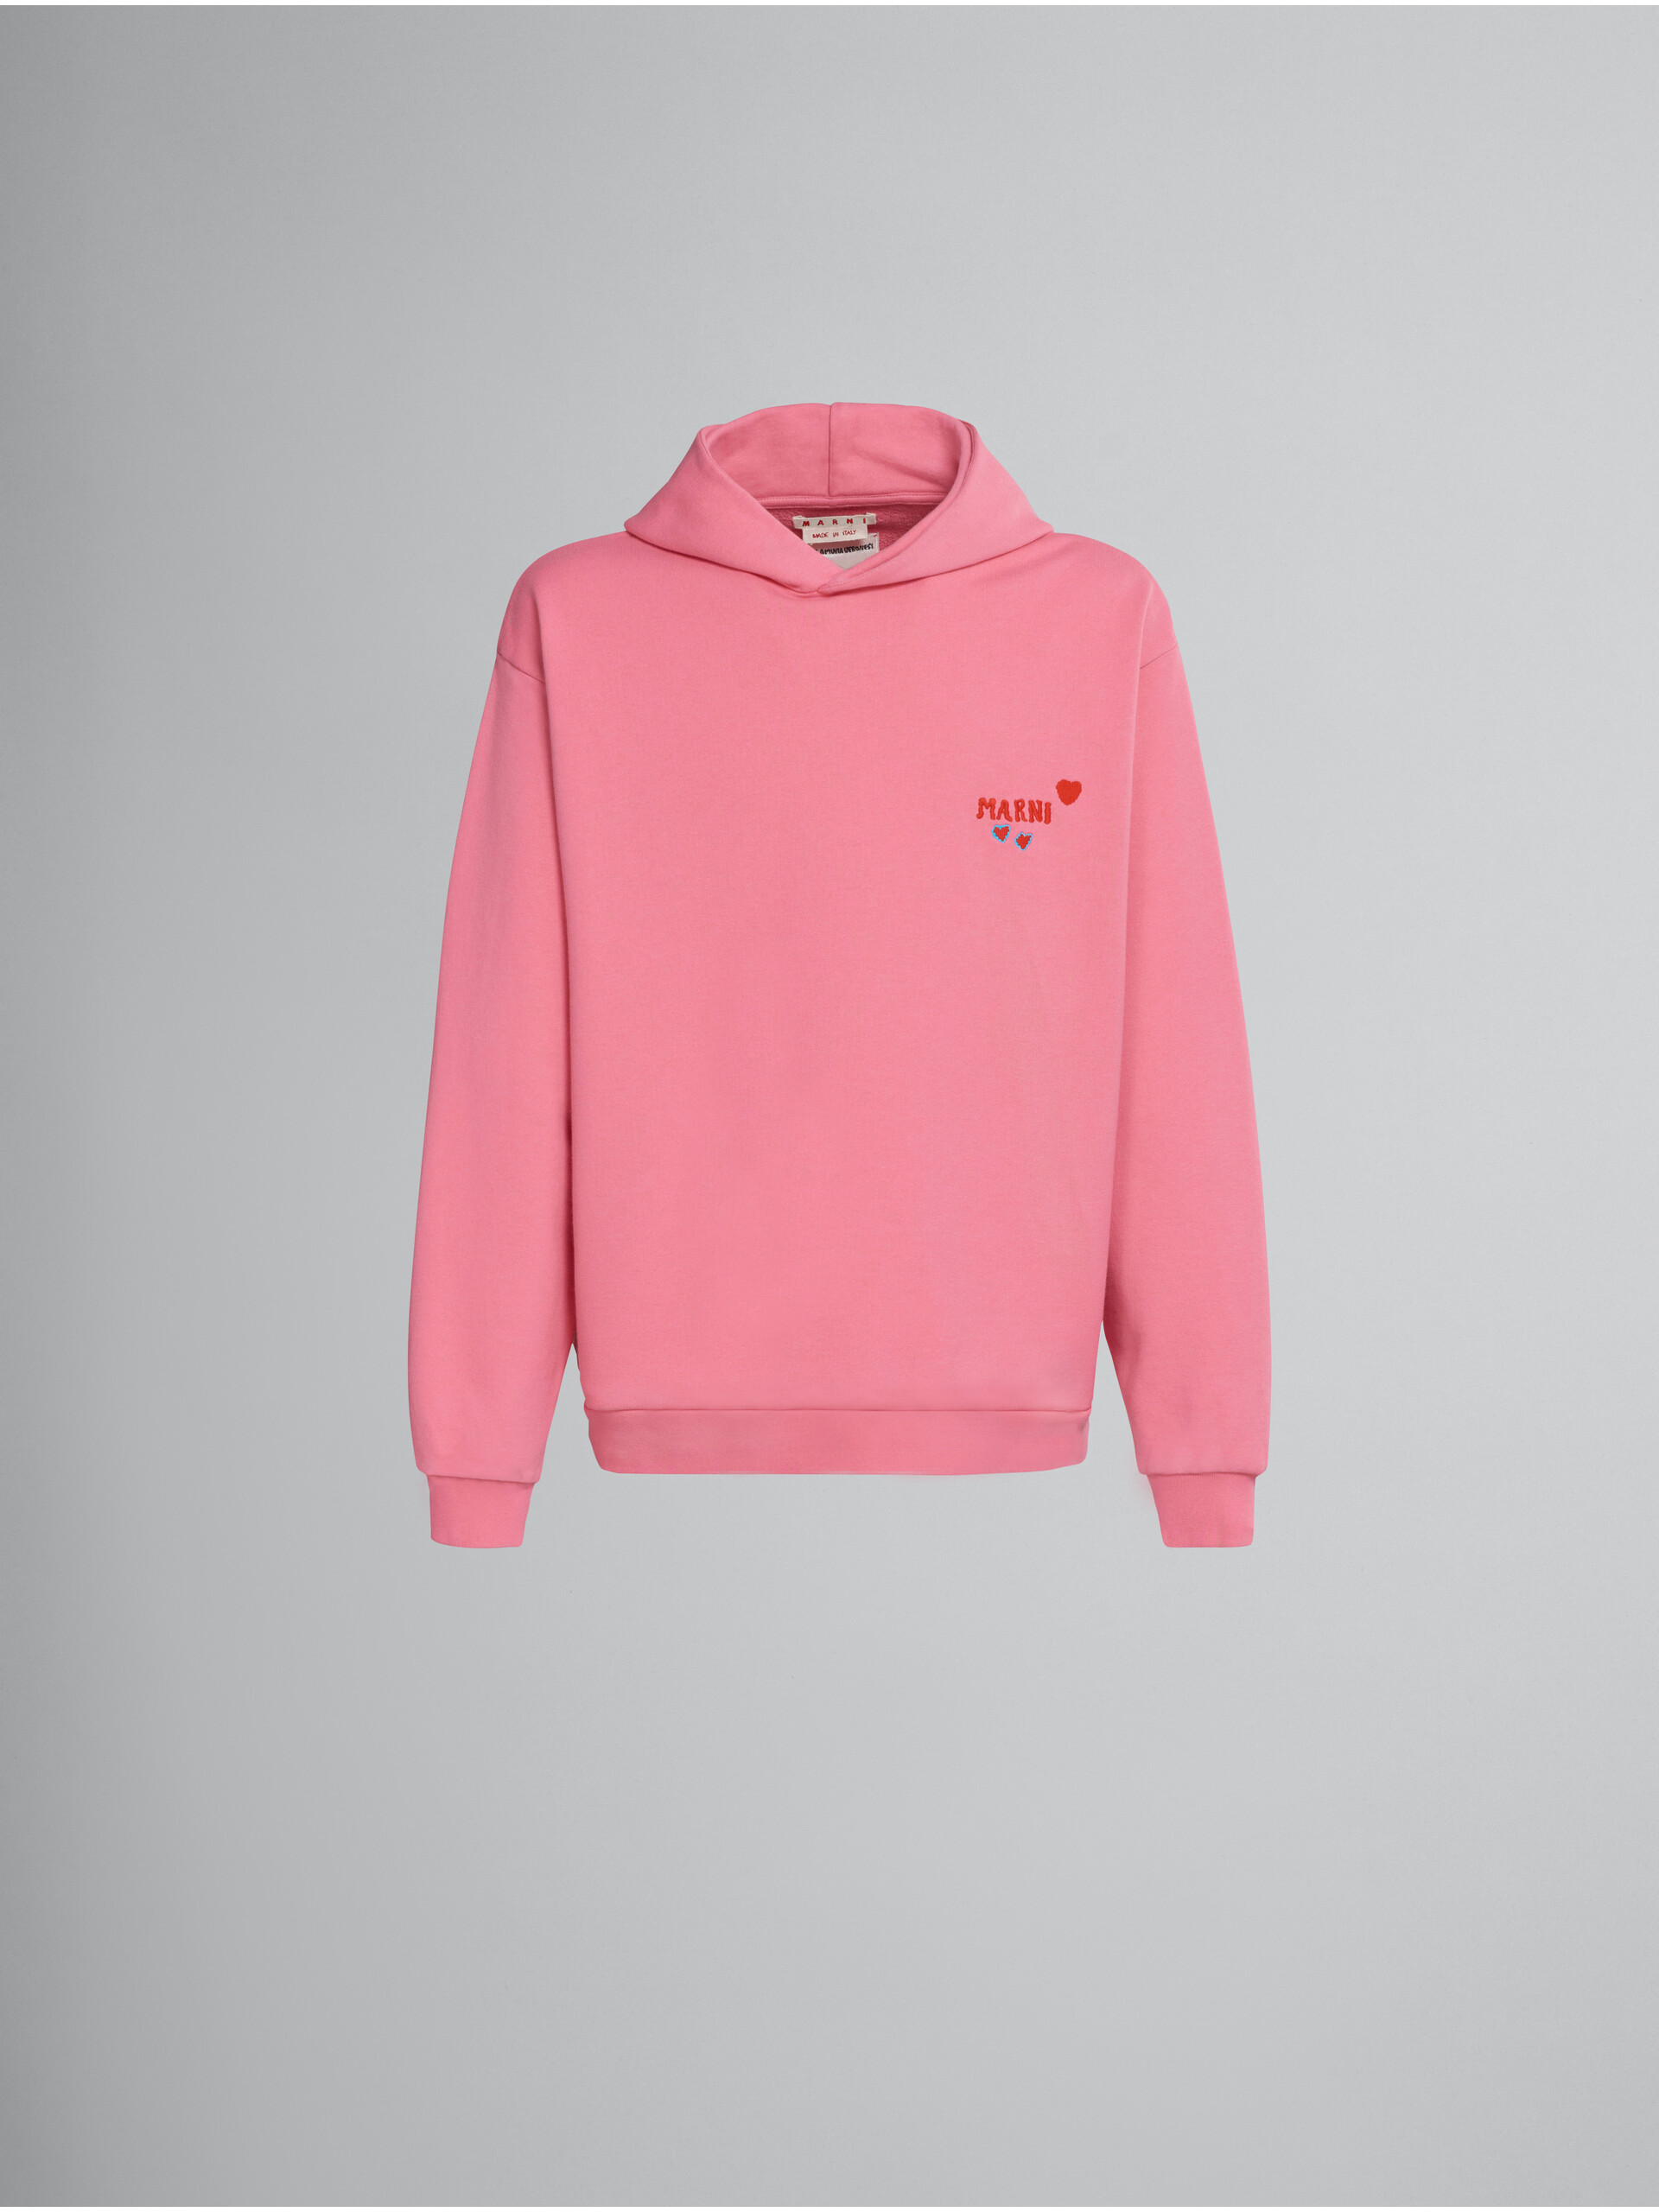 Hoodie with rabbit graphics - Sweaters - Image 1